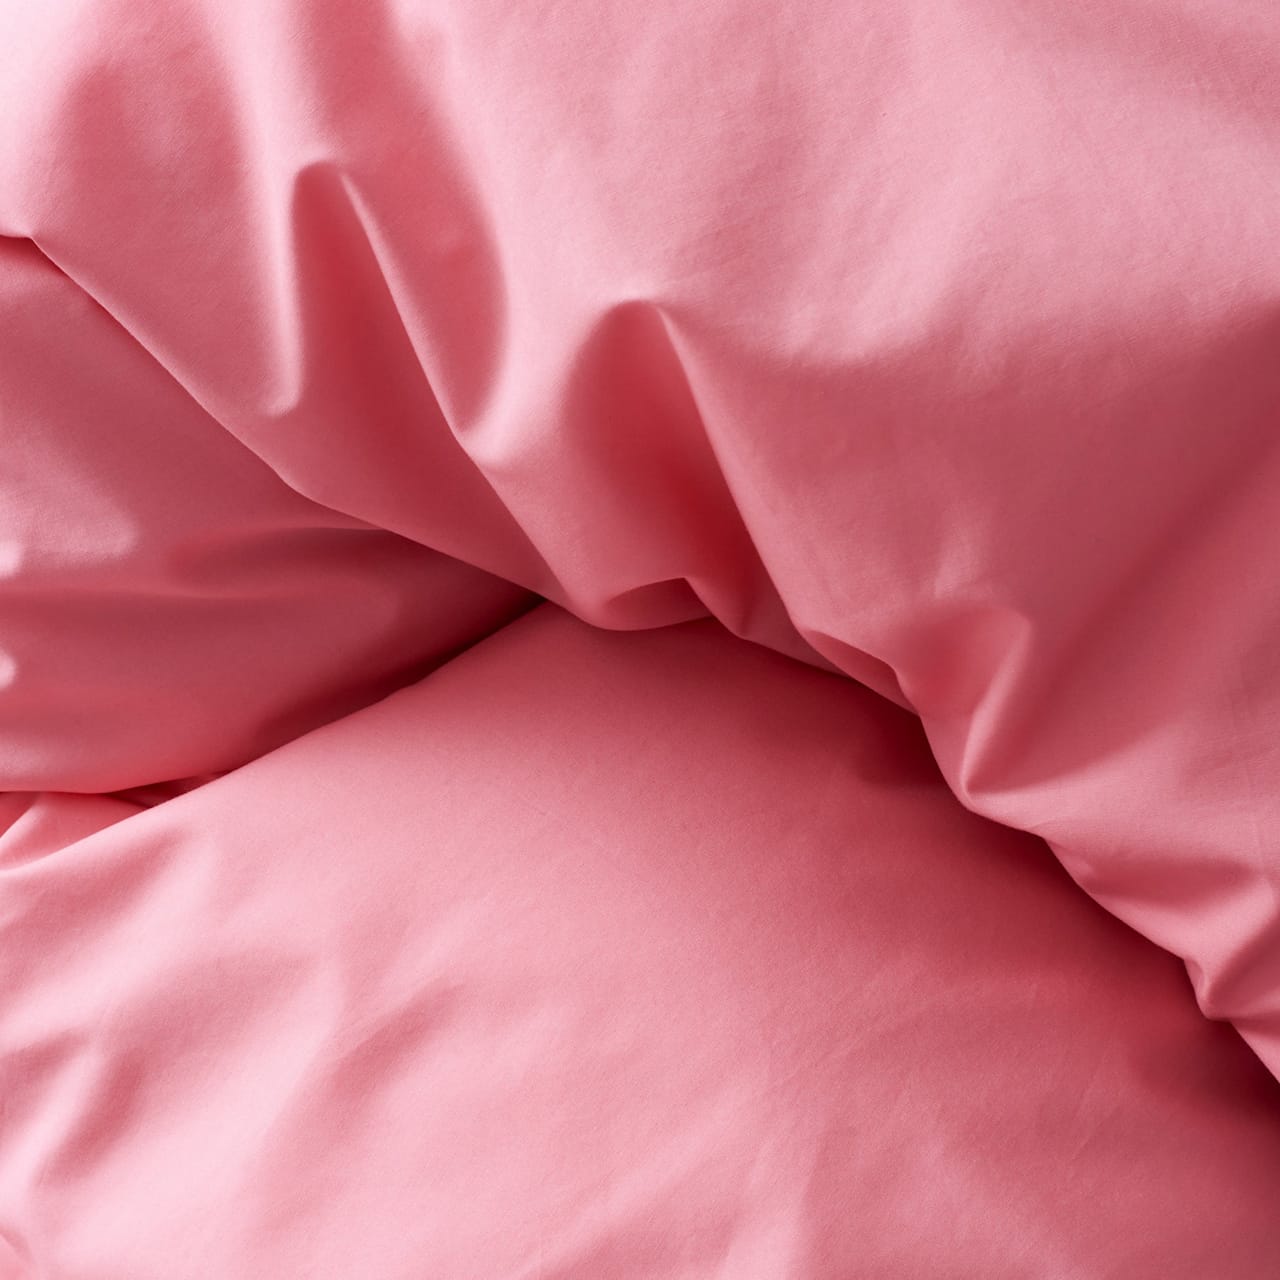 Pure Duvet Cover Poplin - Coral Pink